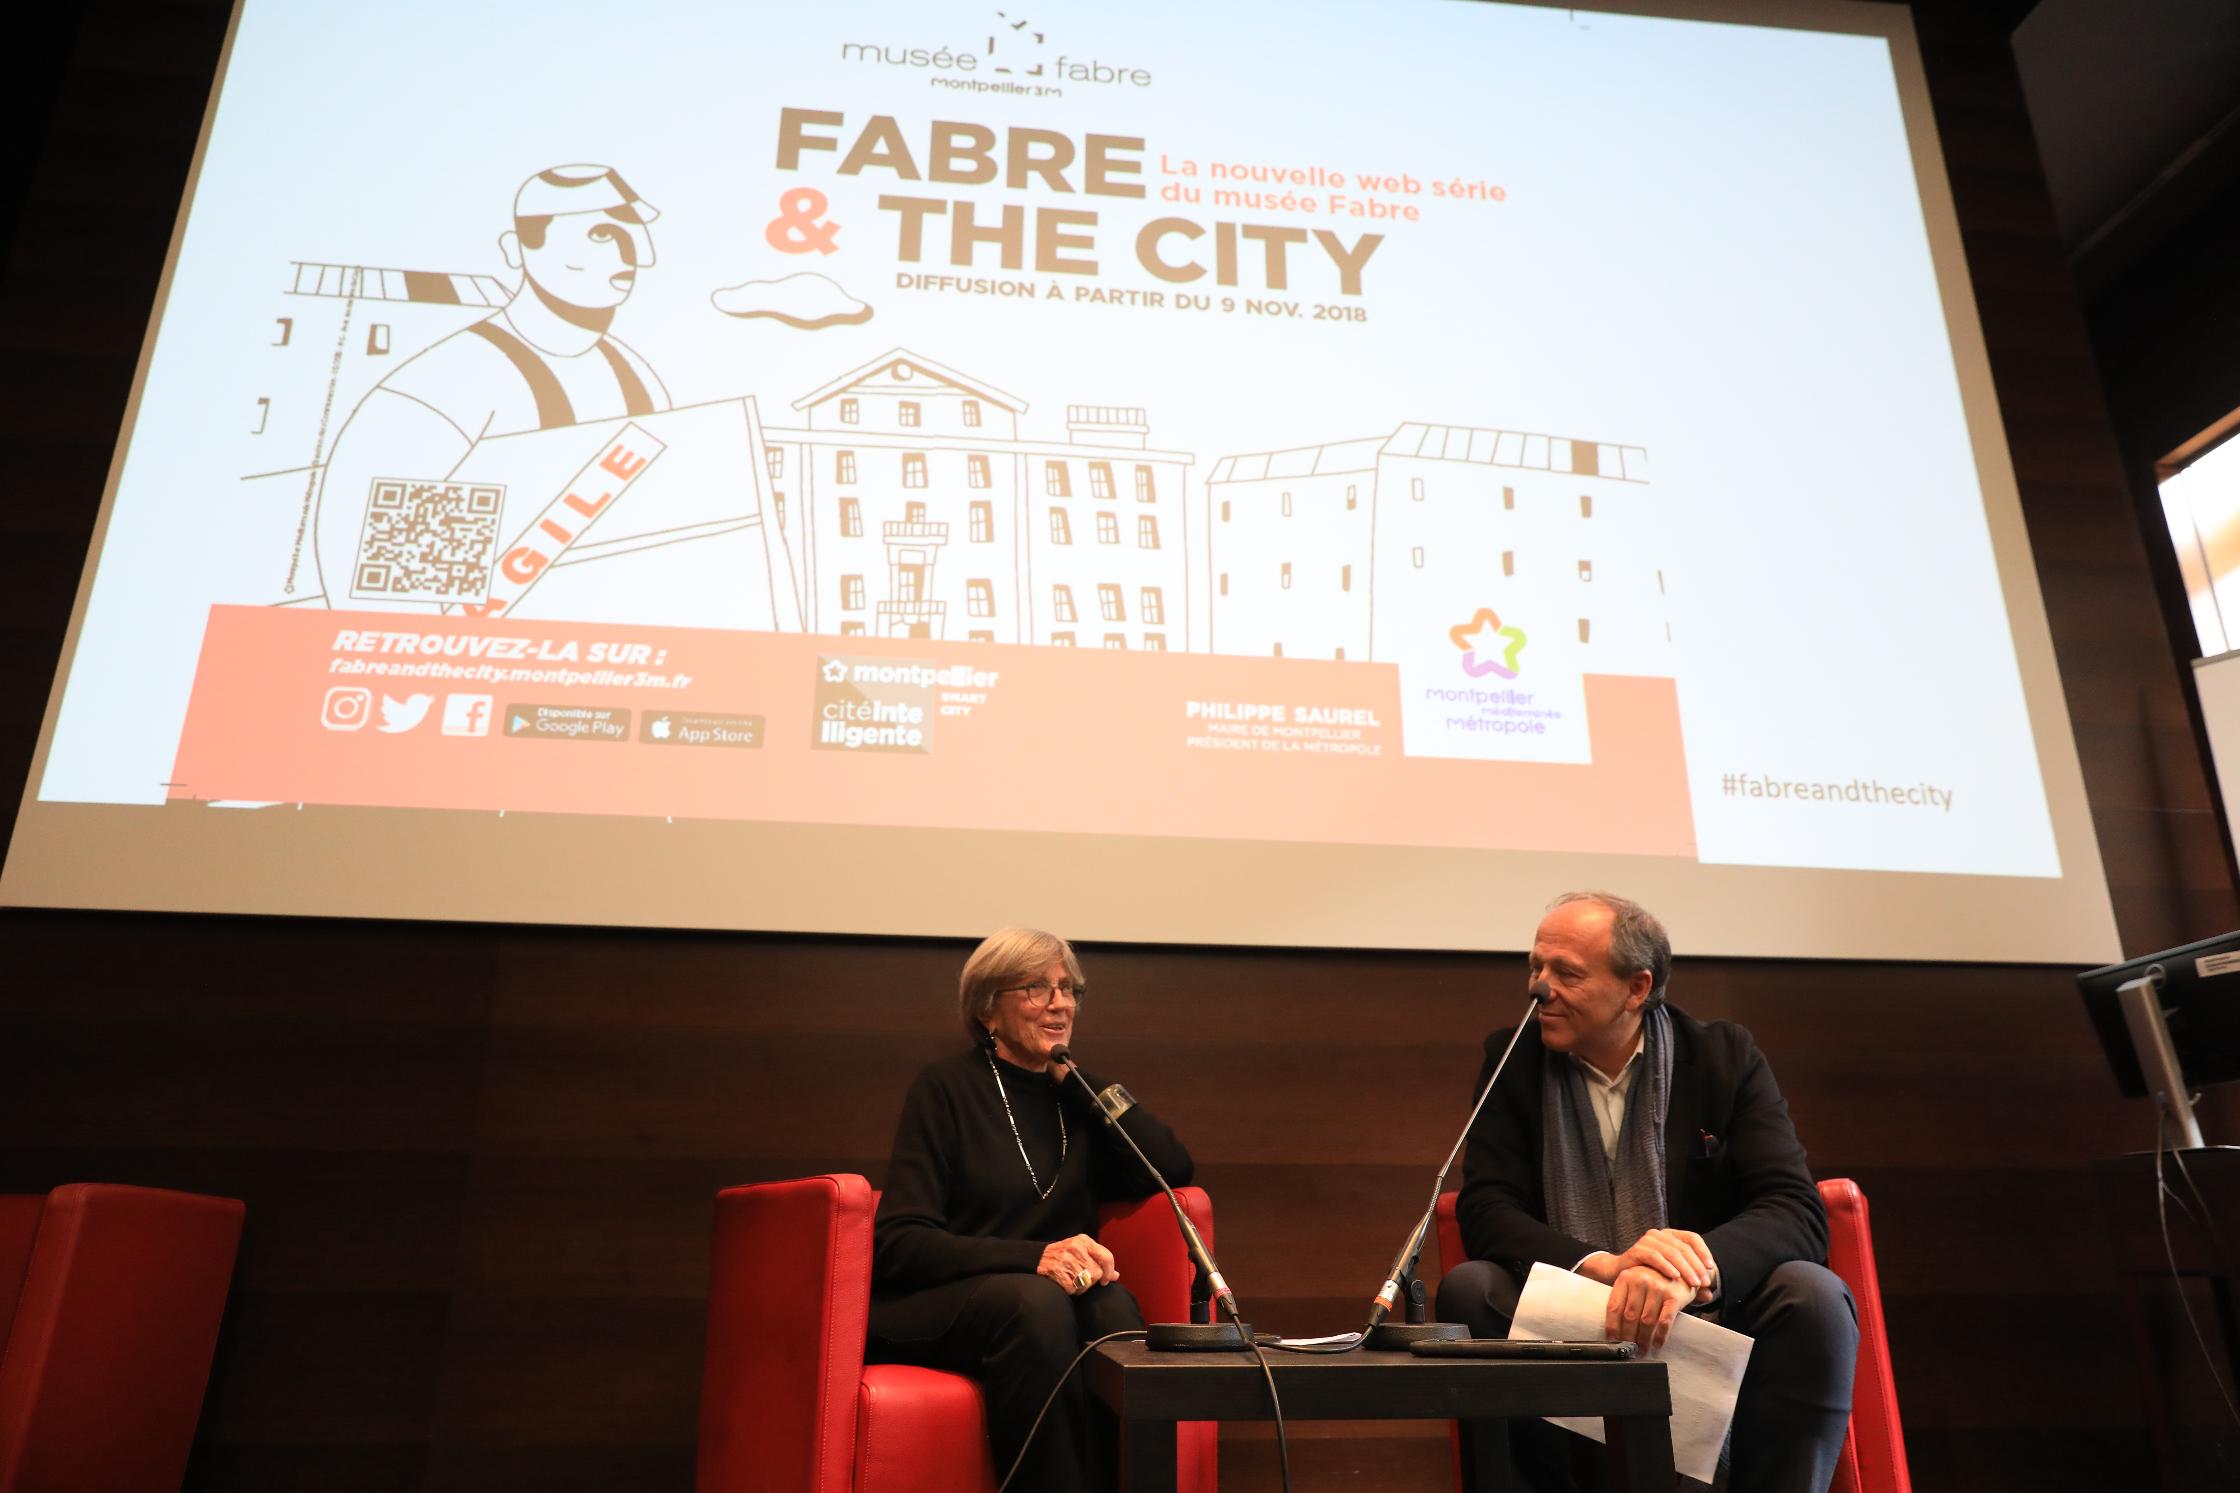 Fabre & The City